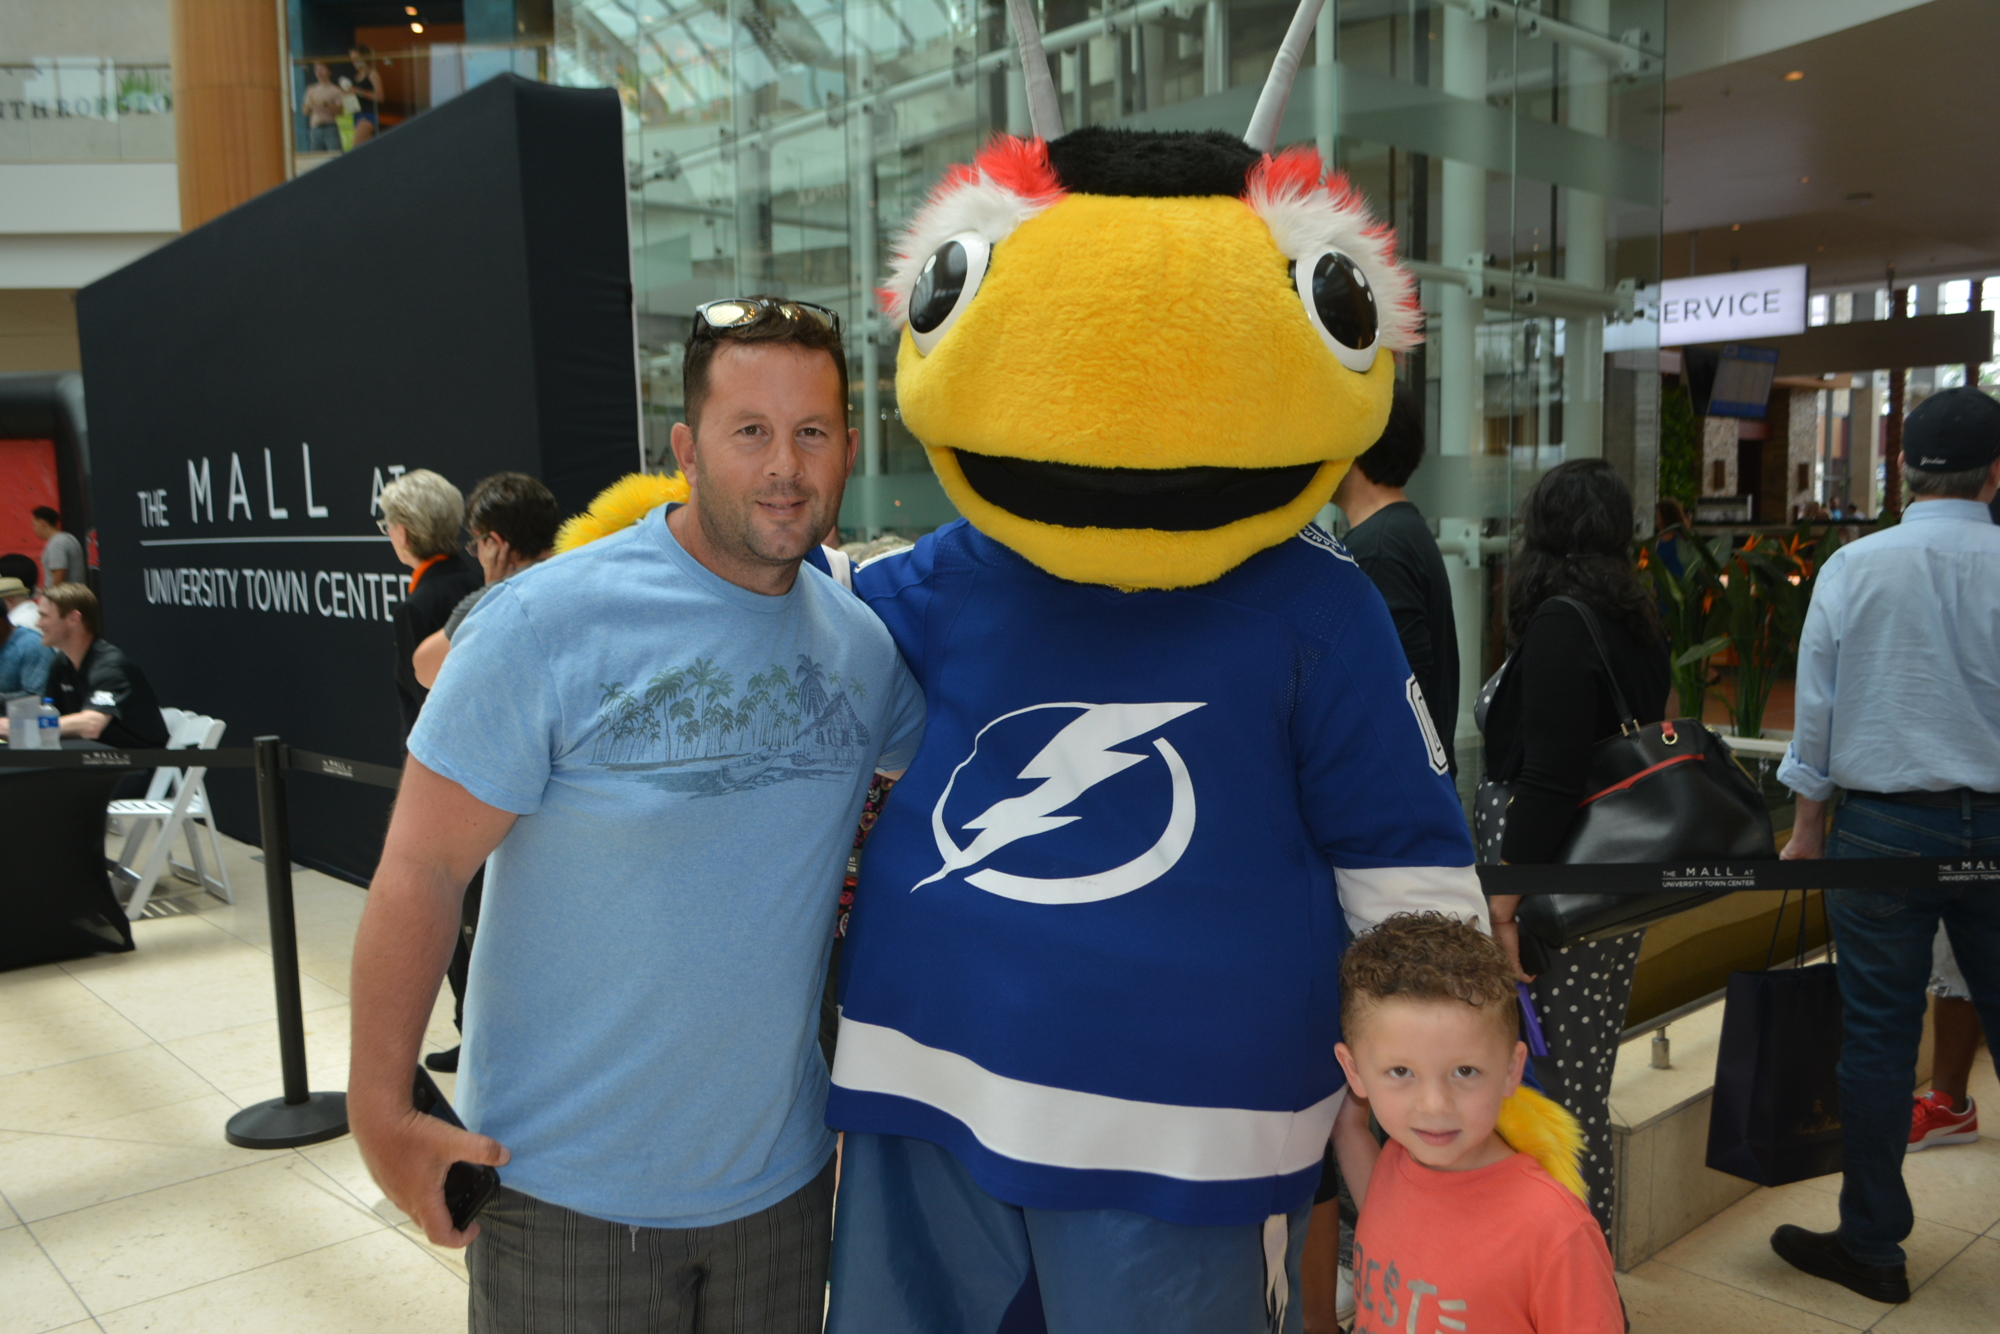 University Park's Vincent Smith and his 4-year-old son, Paxton, had fun meeting Thunderbug, the Lightning mascot.